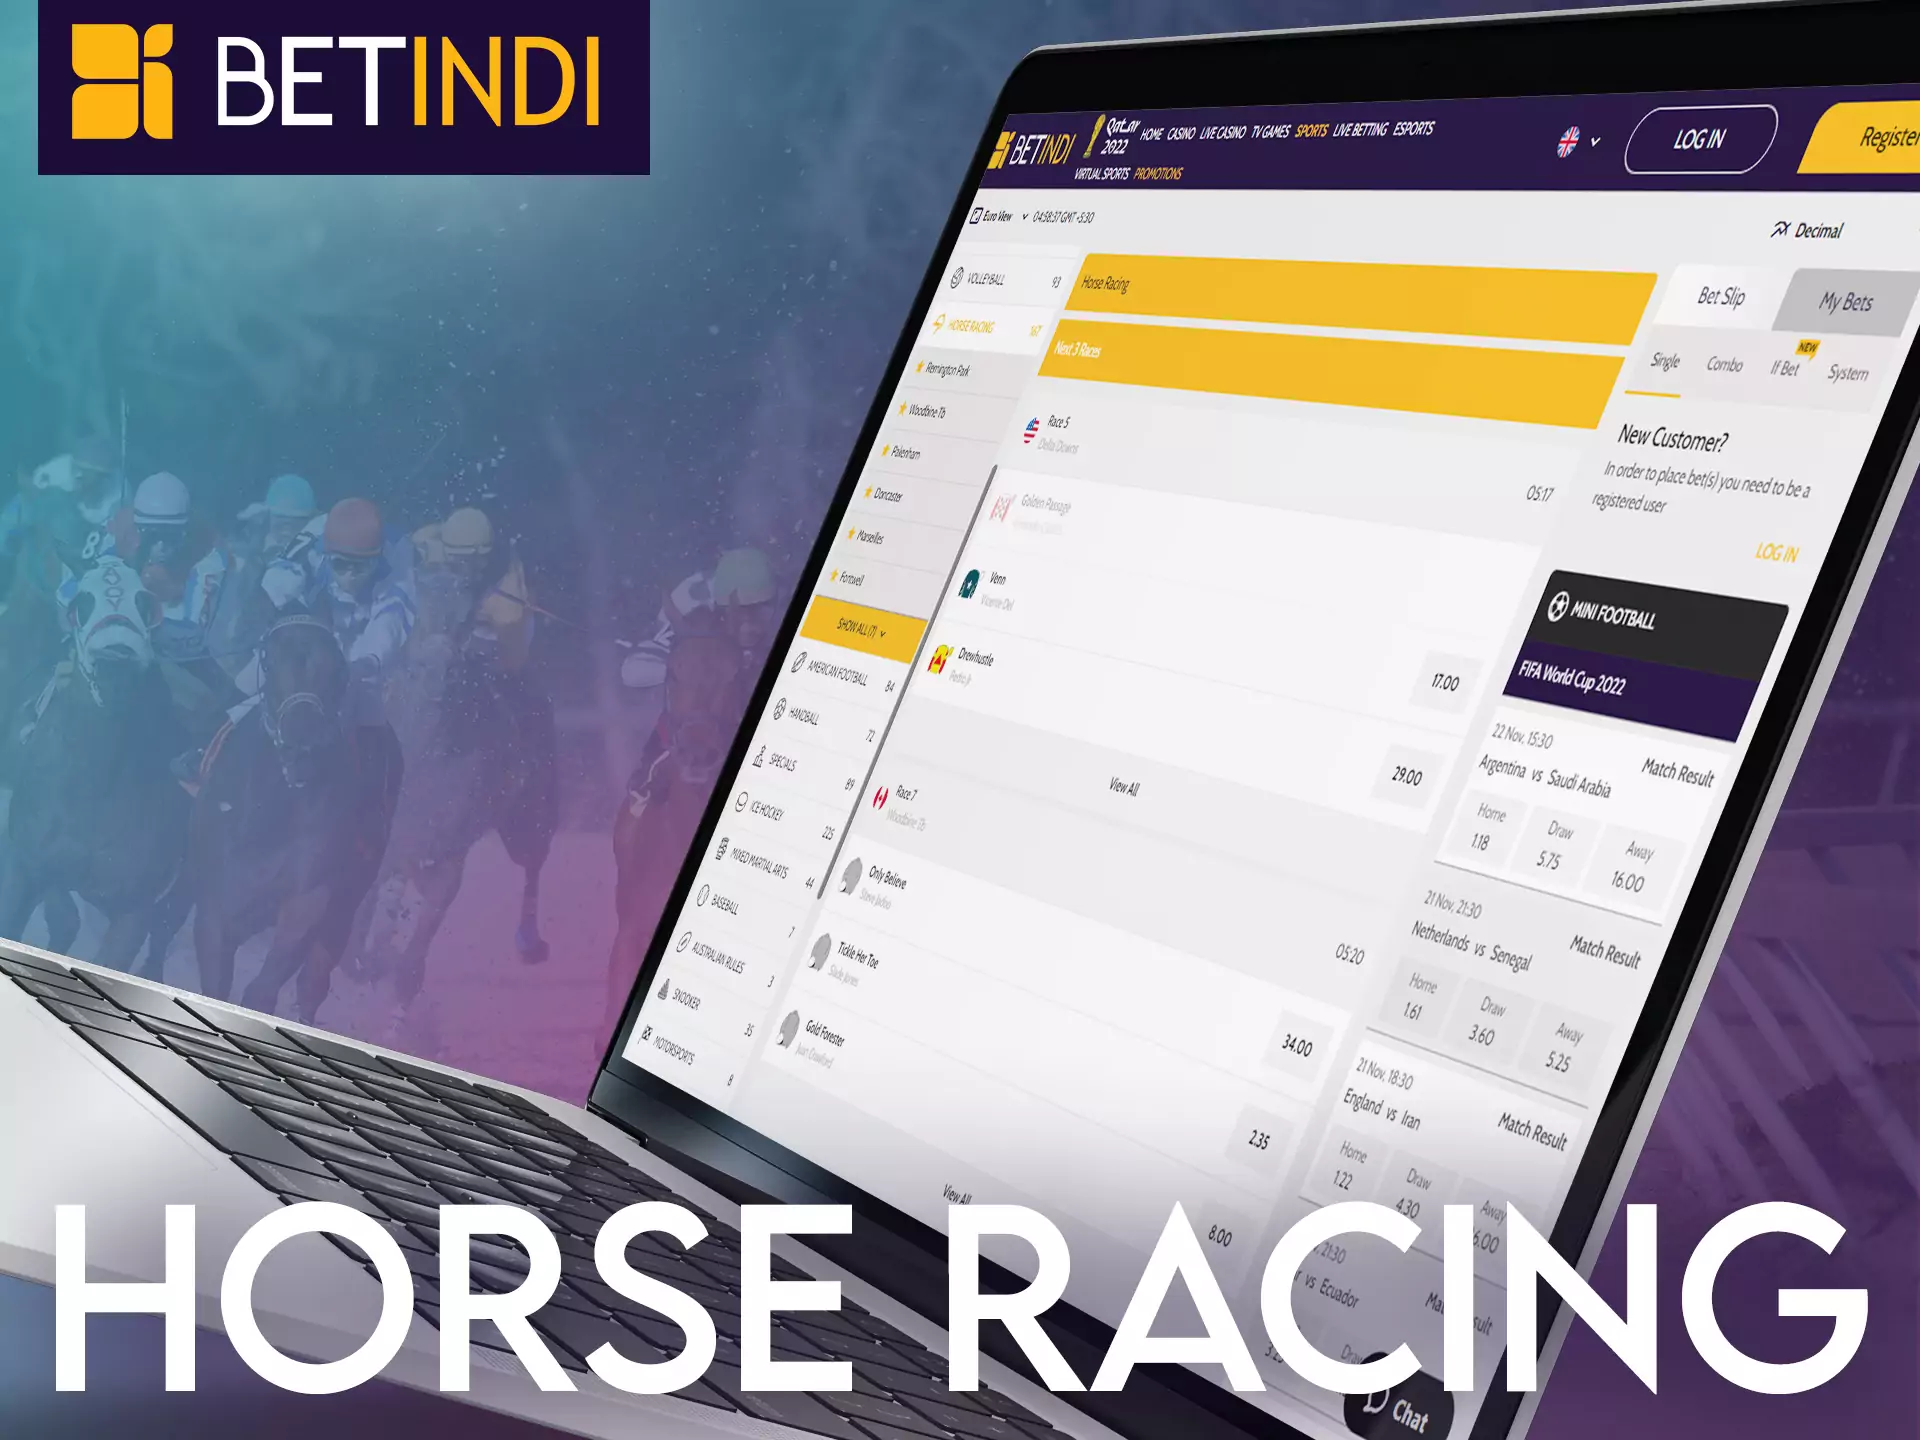 You can bet on horse racing with Betindi.